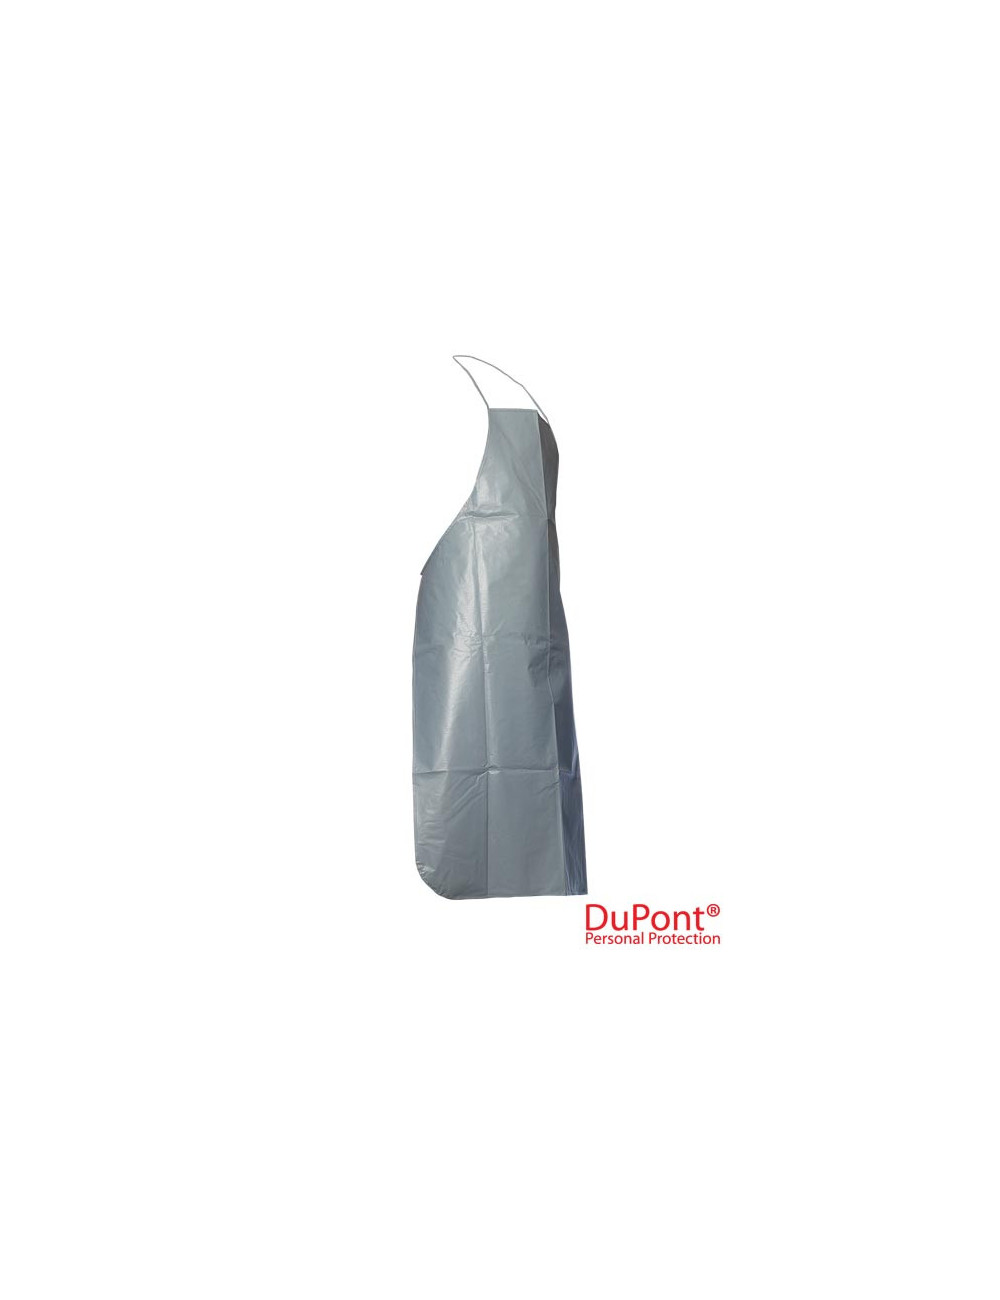 Protective apron tych-f-ap s gray/steel Dupont